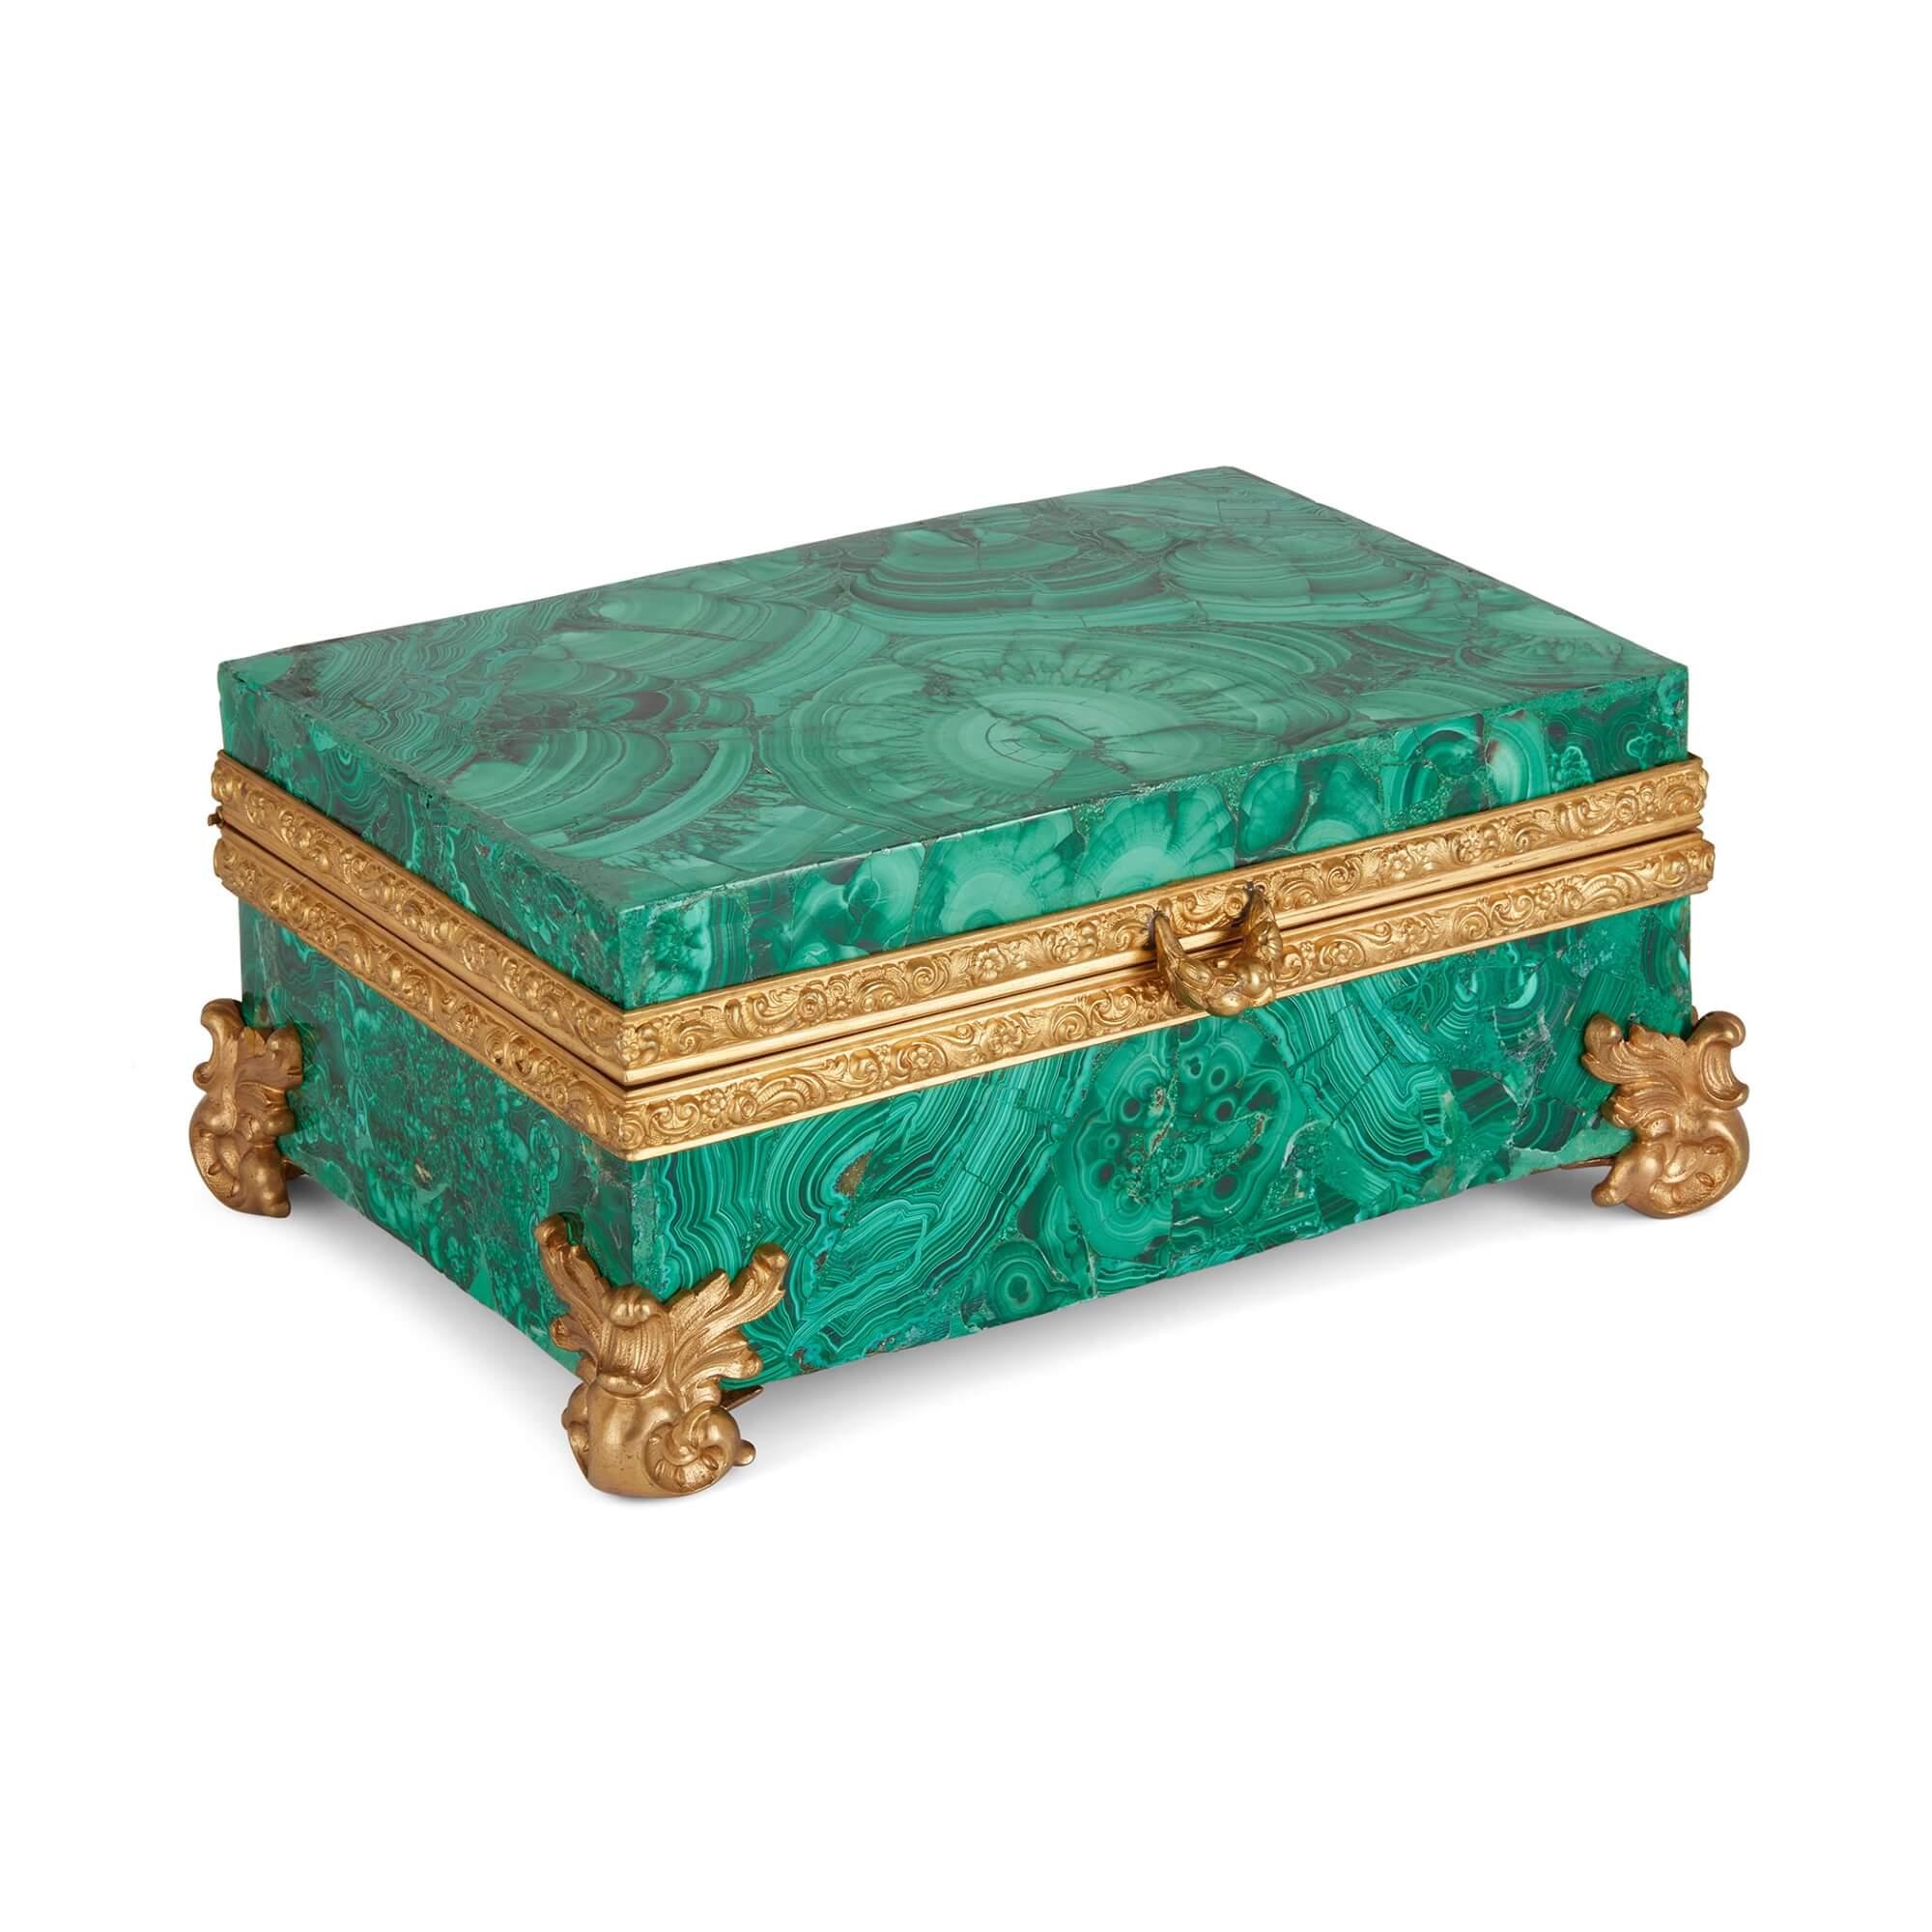 Antique 19th century malachite and ormolu casket 
Russian, Mid-19th Century
Height 9cm, width 21cm, depth 15cm

This magnificent malachite casket celebrates the work of 19th century Russian craftsmen. 

Of a rectangular shape, the casket is covered